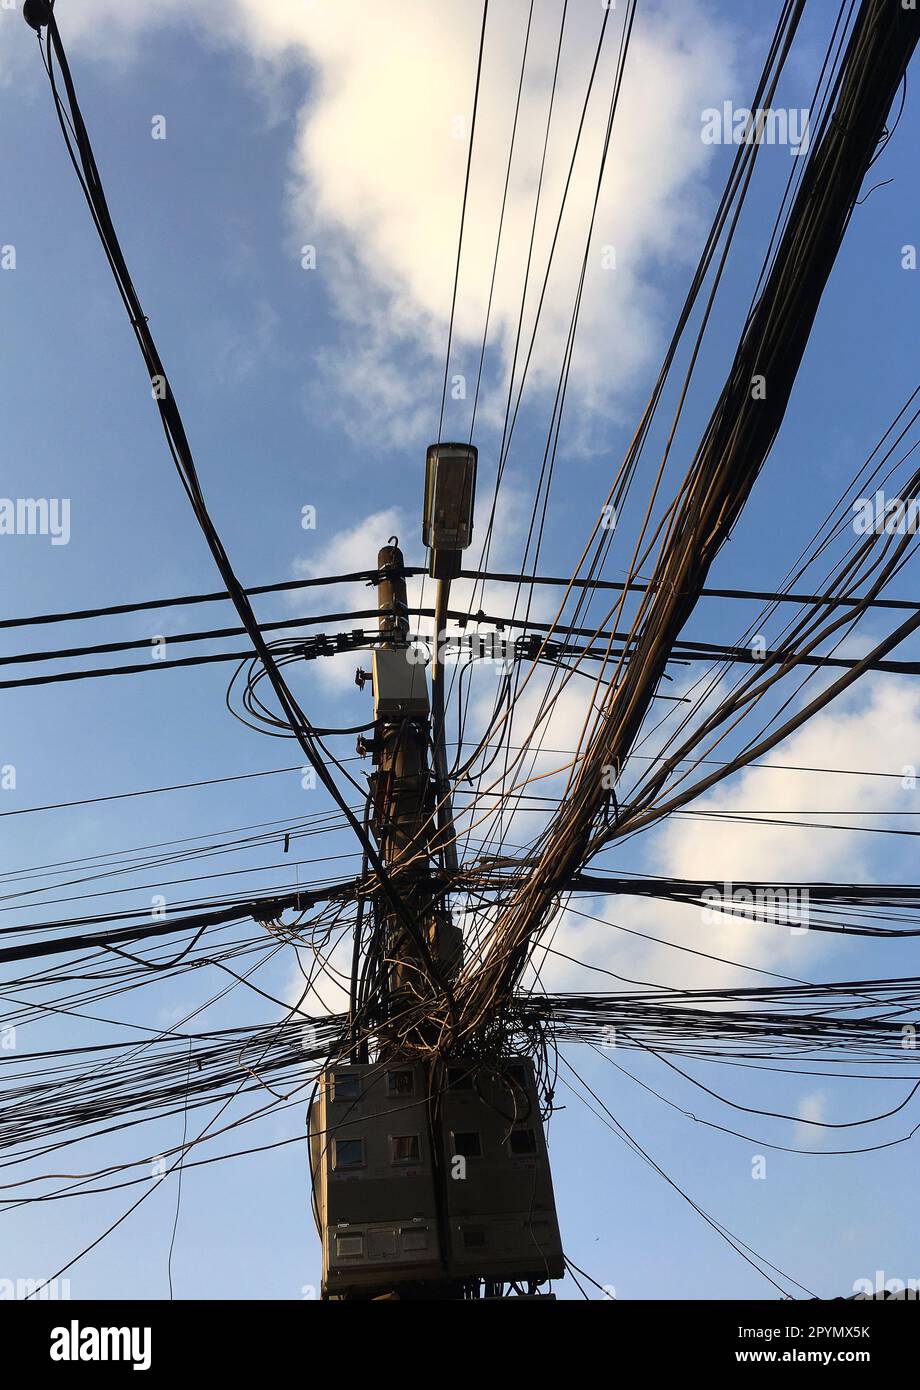 Electricity poles with very natural wires are typical symbols throughout Vietnam Stock Photo